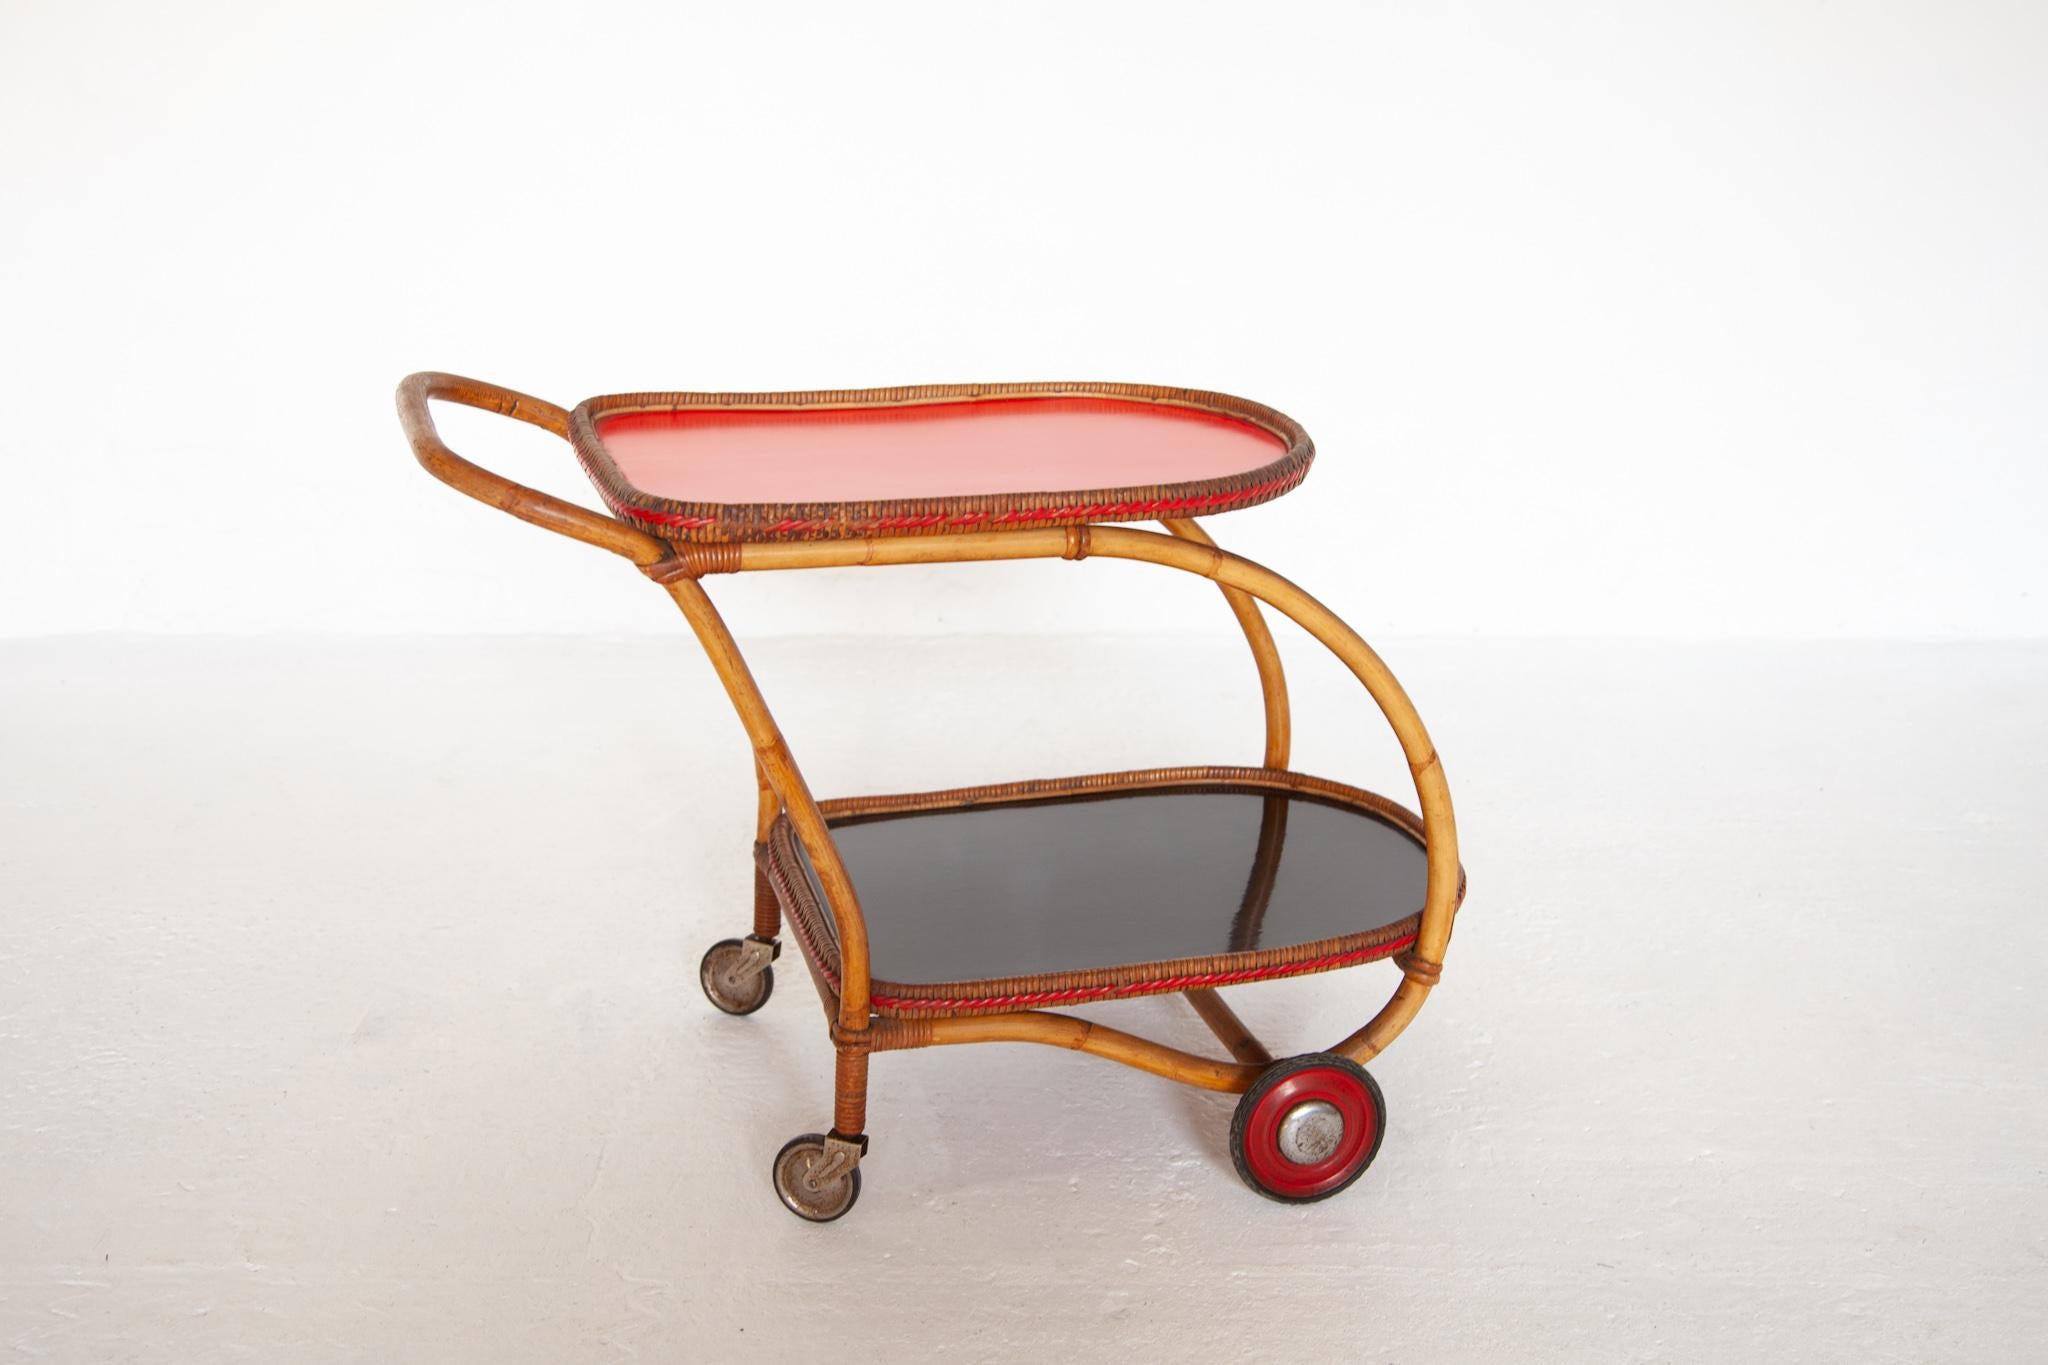 Rare Fifties designed bar cart a quality workmanship made in Italy. The bar cart featured a bamboo frame, the plateaus are laminated in red and black oval shaped in original very good condition with a nice patina and fully functional usable and